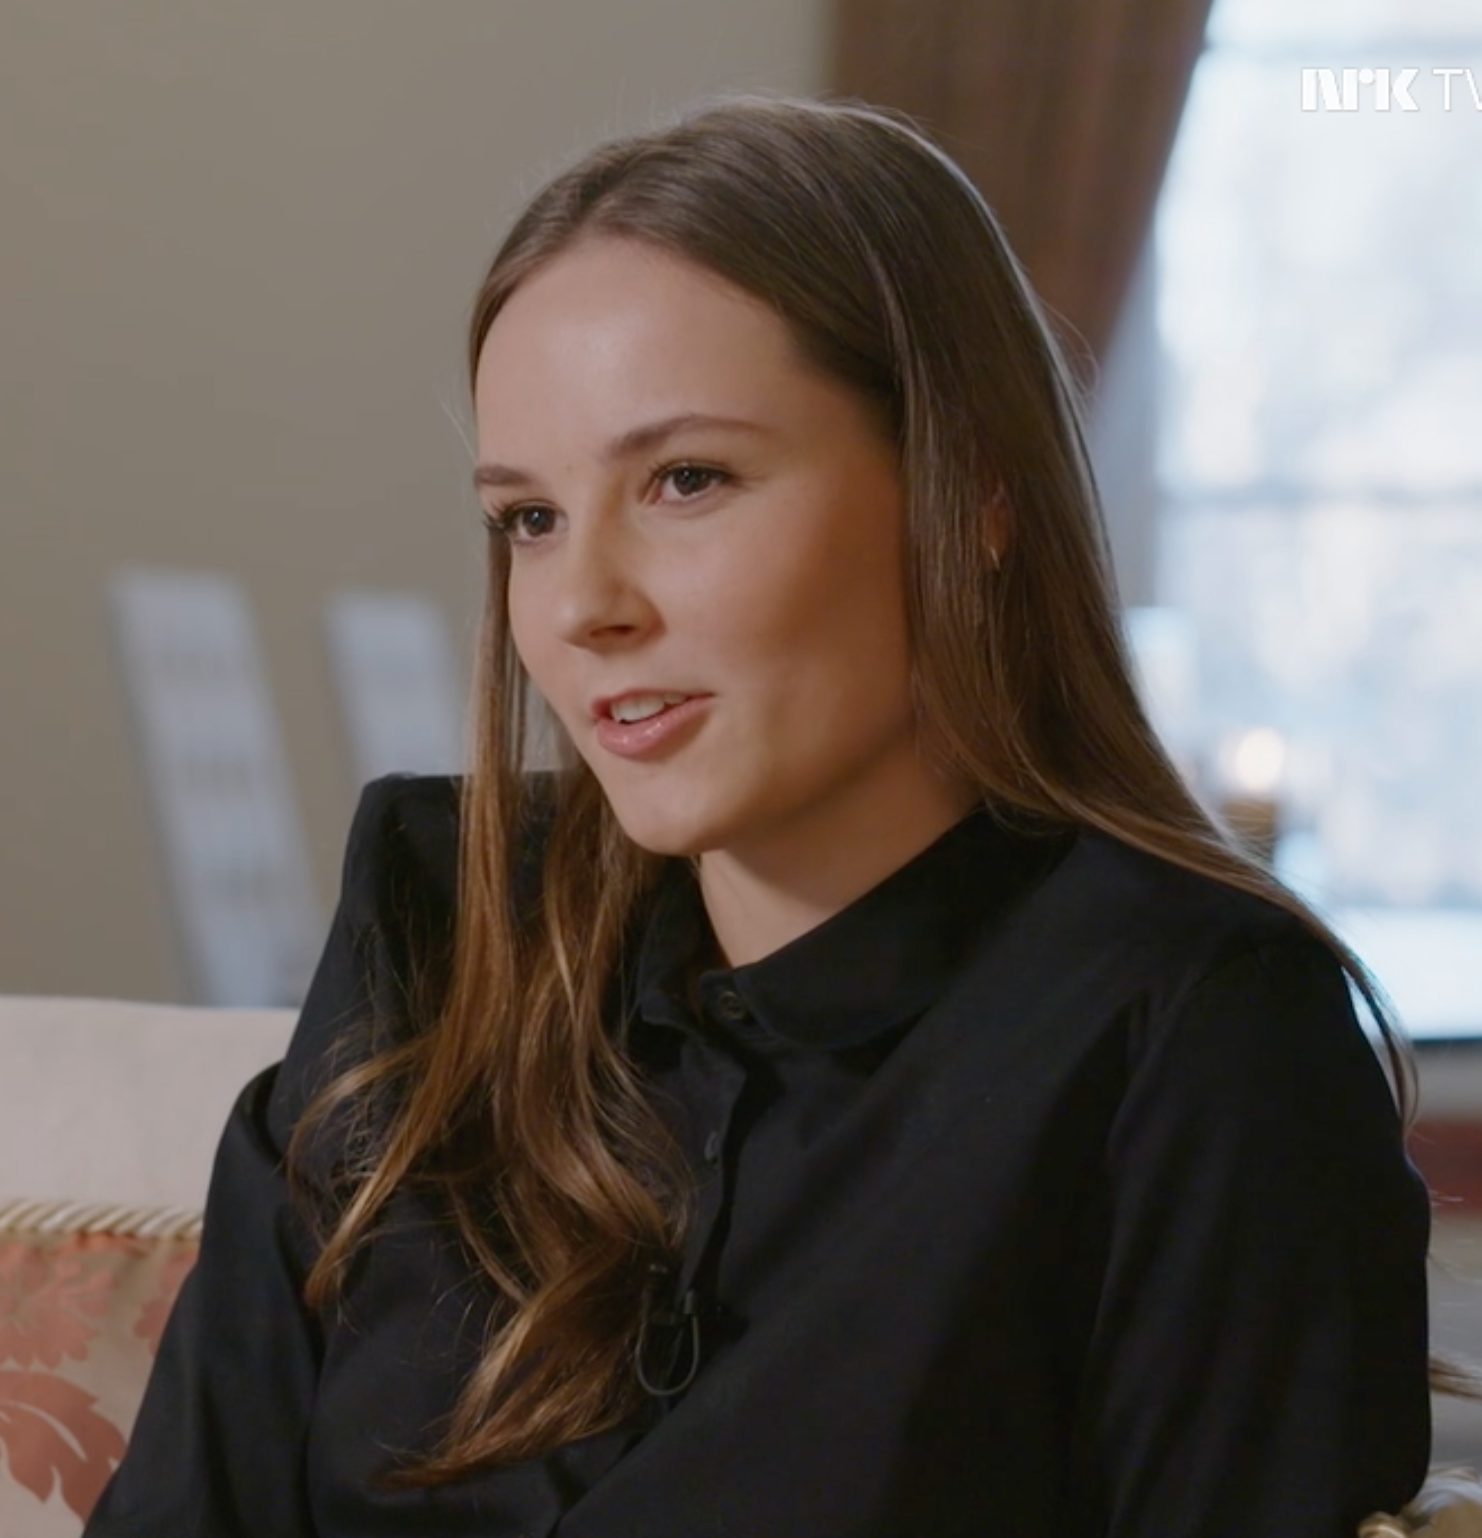 Princess Ingrid Alexandra gives first interviews on her 18th birthday